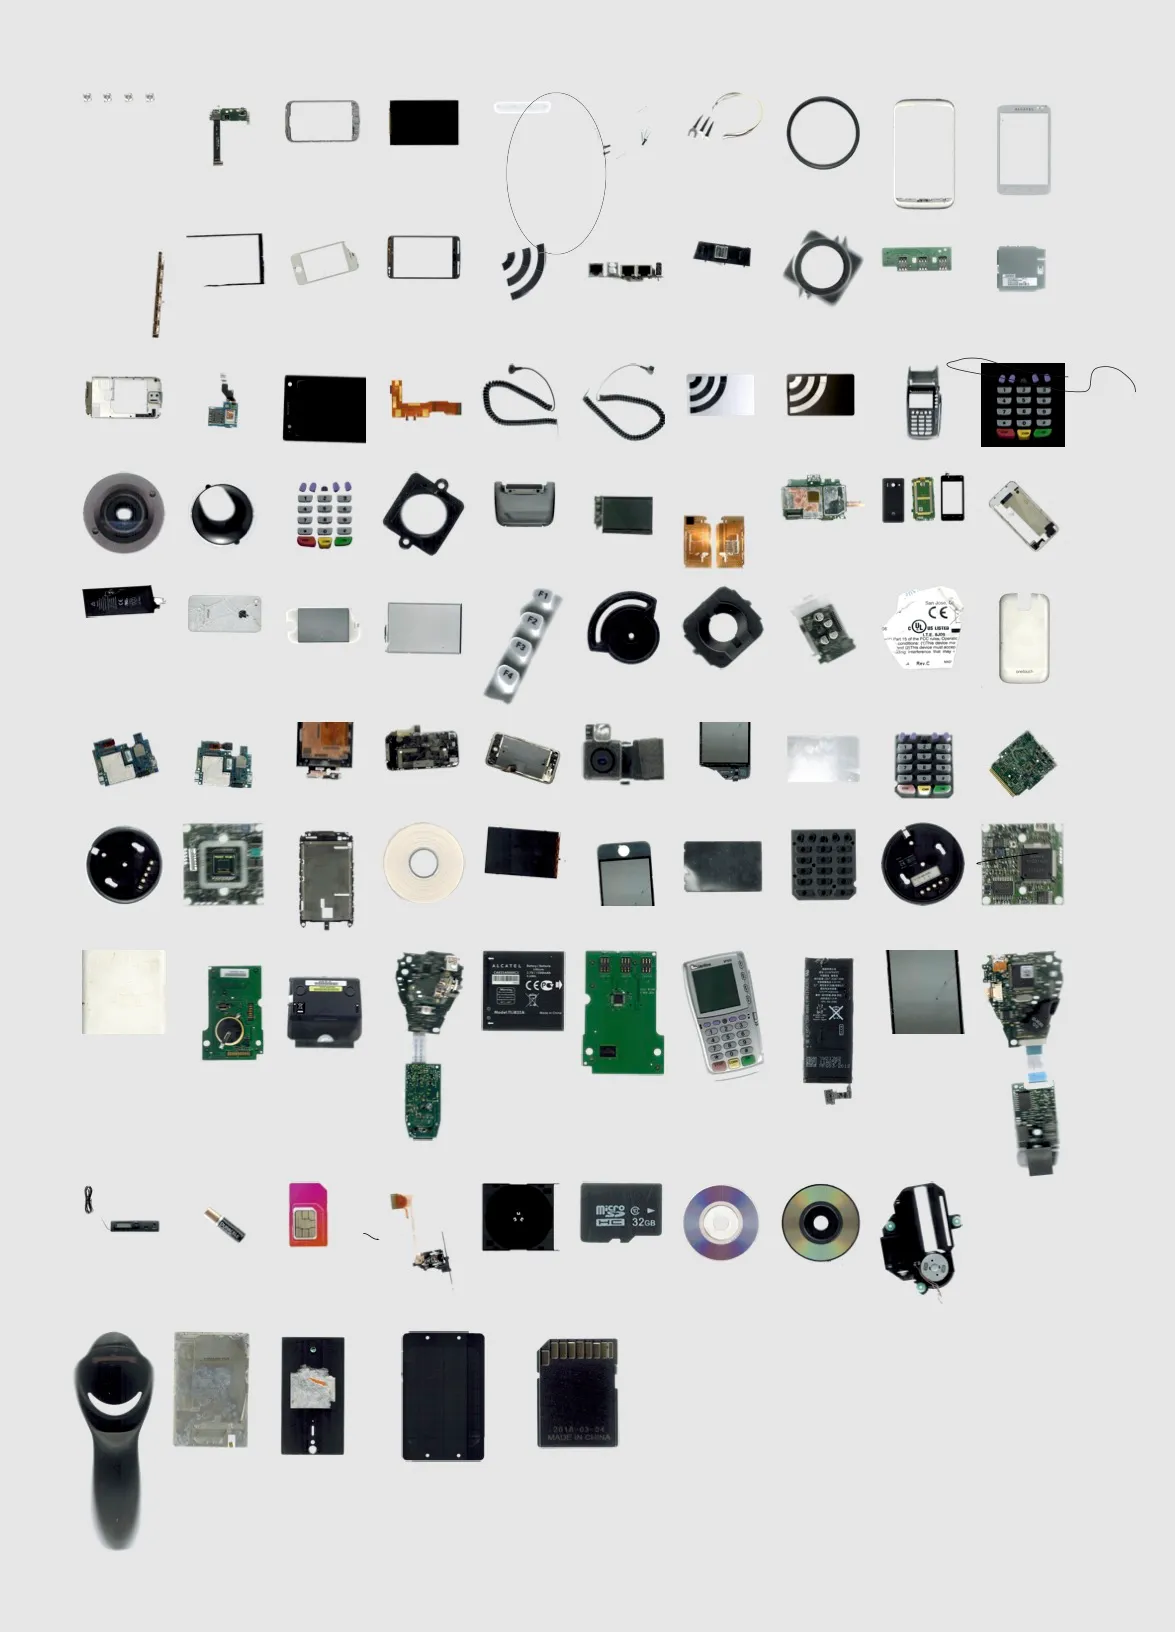 The archive of documented parts